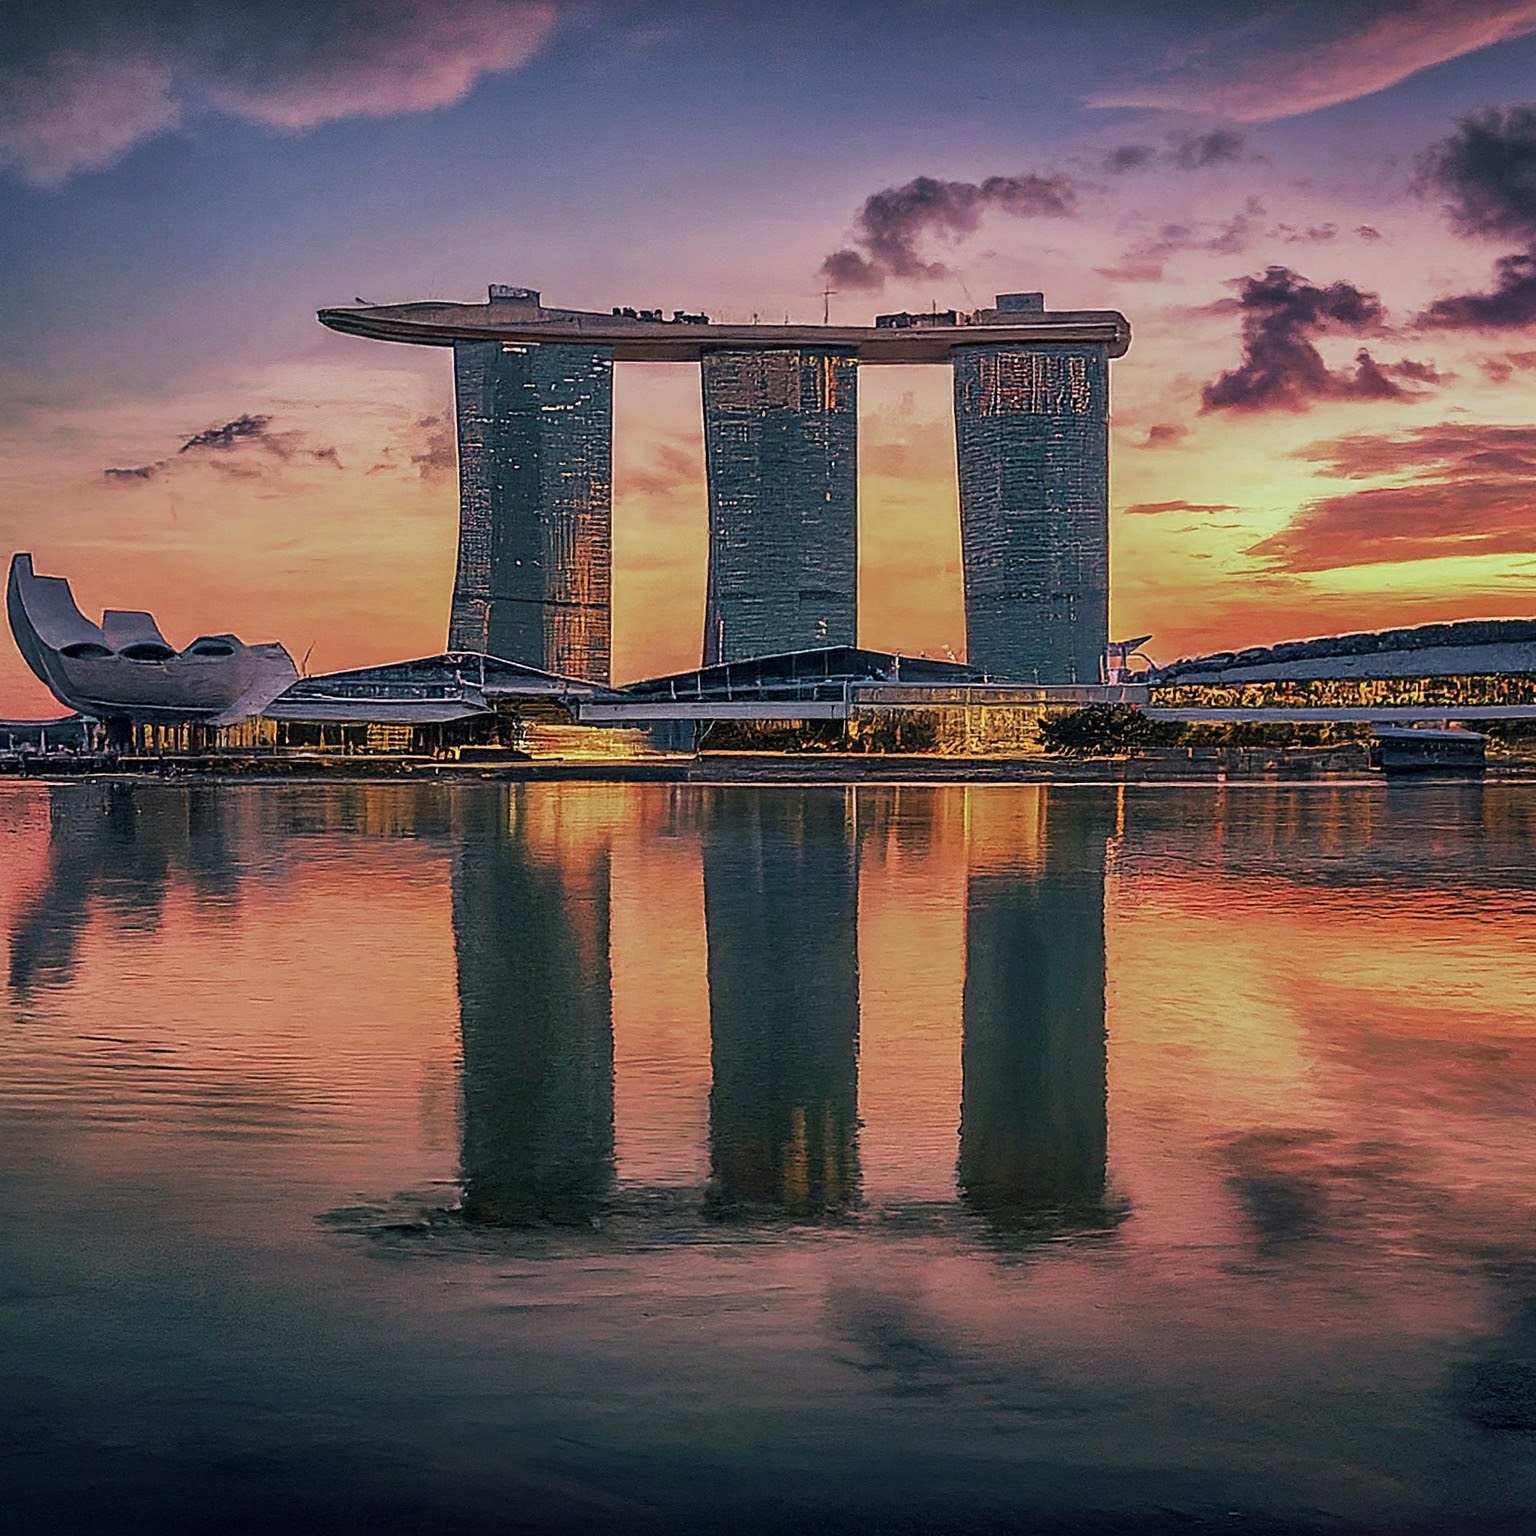 Marina Bay Sands hotel in Singapore at sunset with colorful sky reflections.